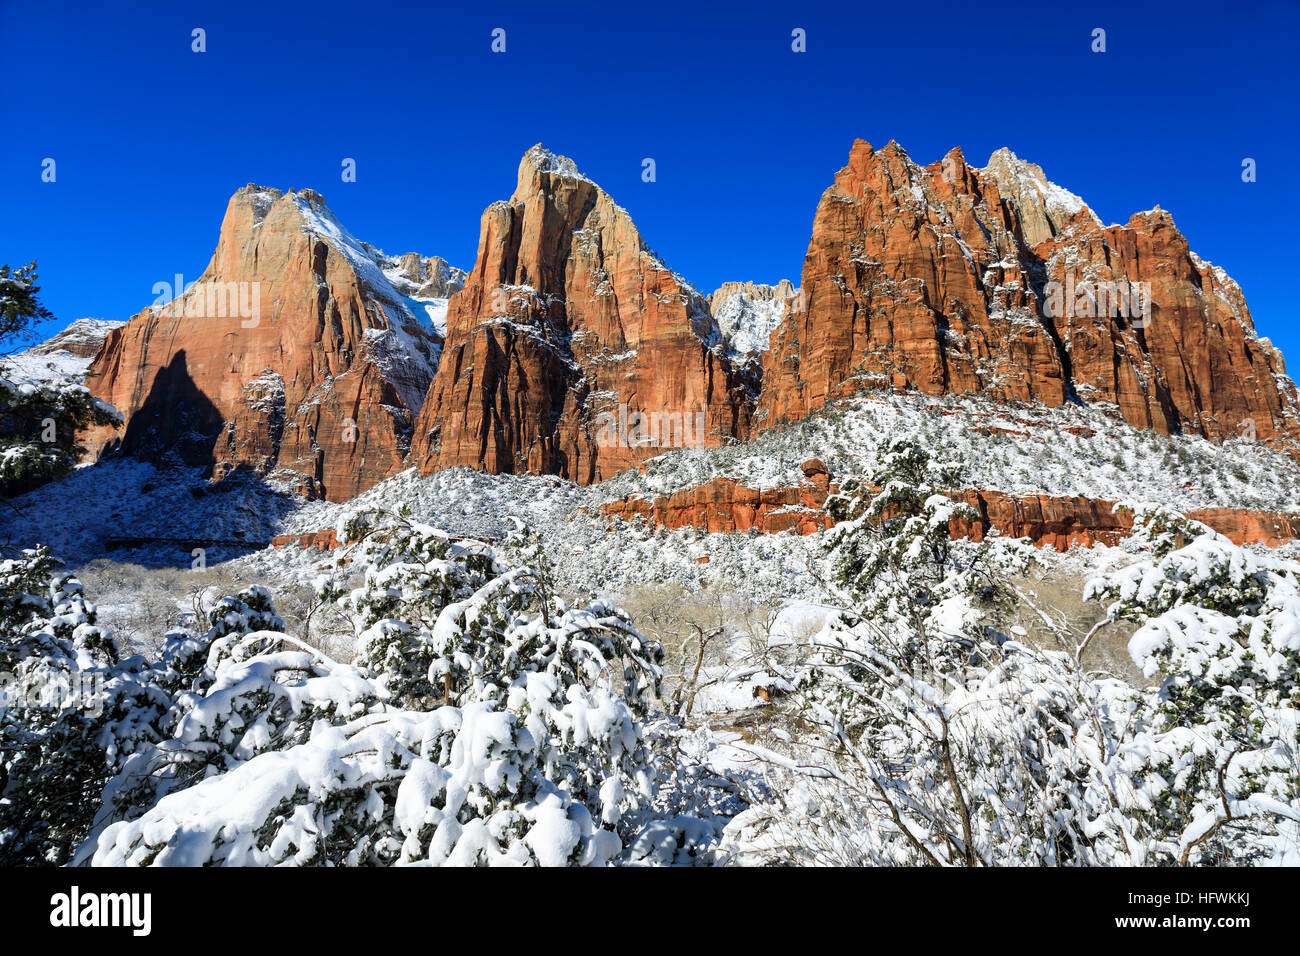 The Court of the Patriarchs with a fresh covering of snow in Zion Canyon, Zion National Park Utah USA Stock Photo